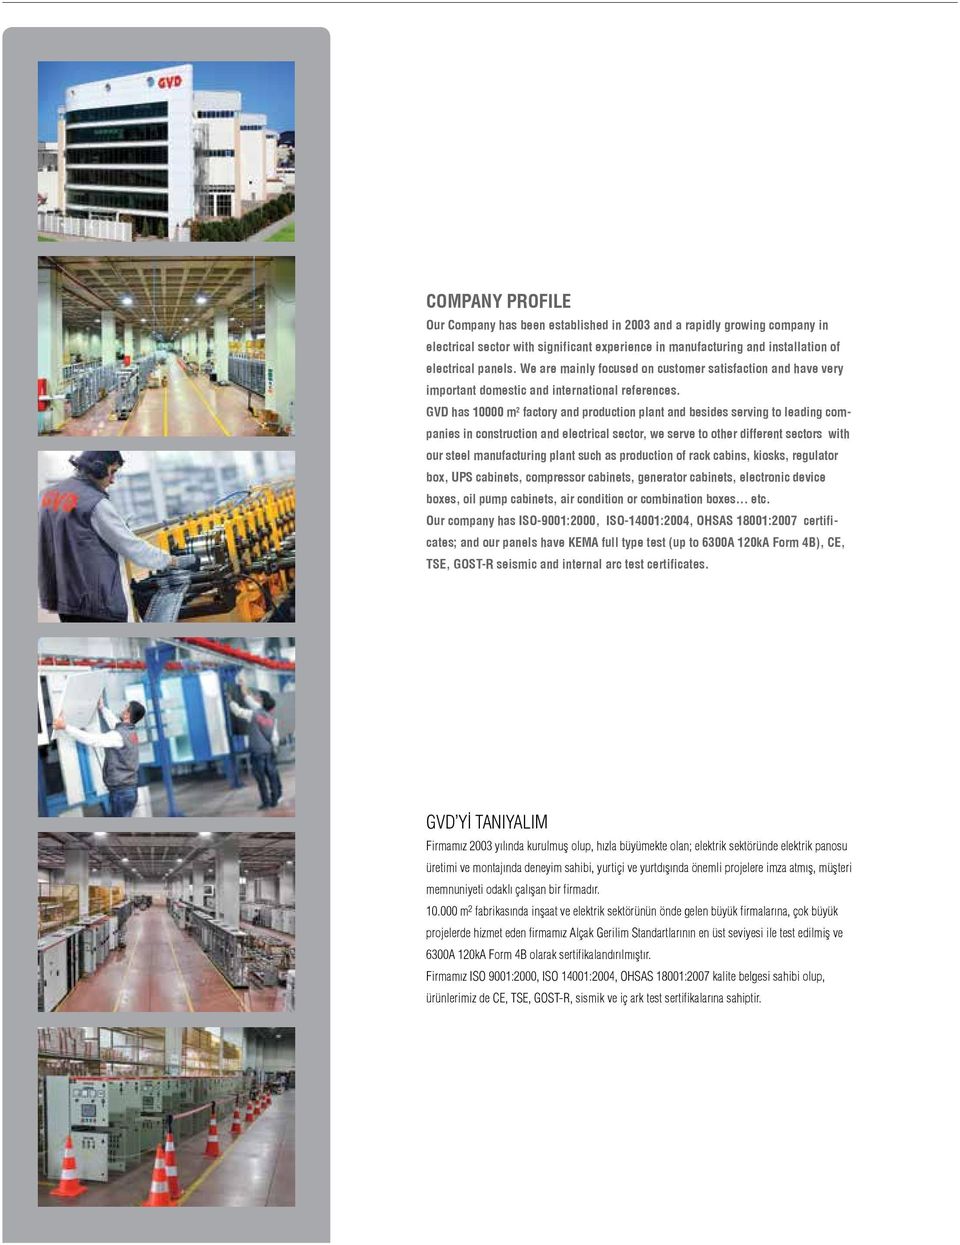 GVD has 10000 m 2 factory and production plant and besides serving to leading companies in construction and electrical sector, we serve to other different sectors with our steel manufacturing plant